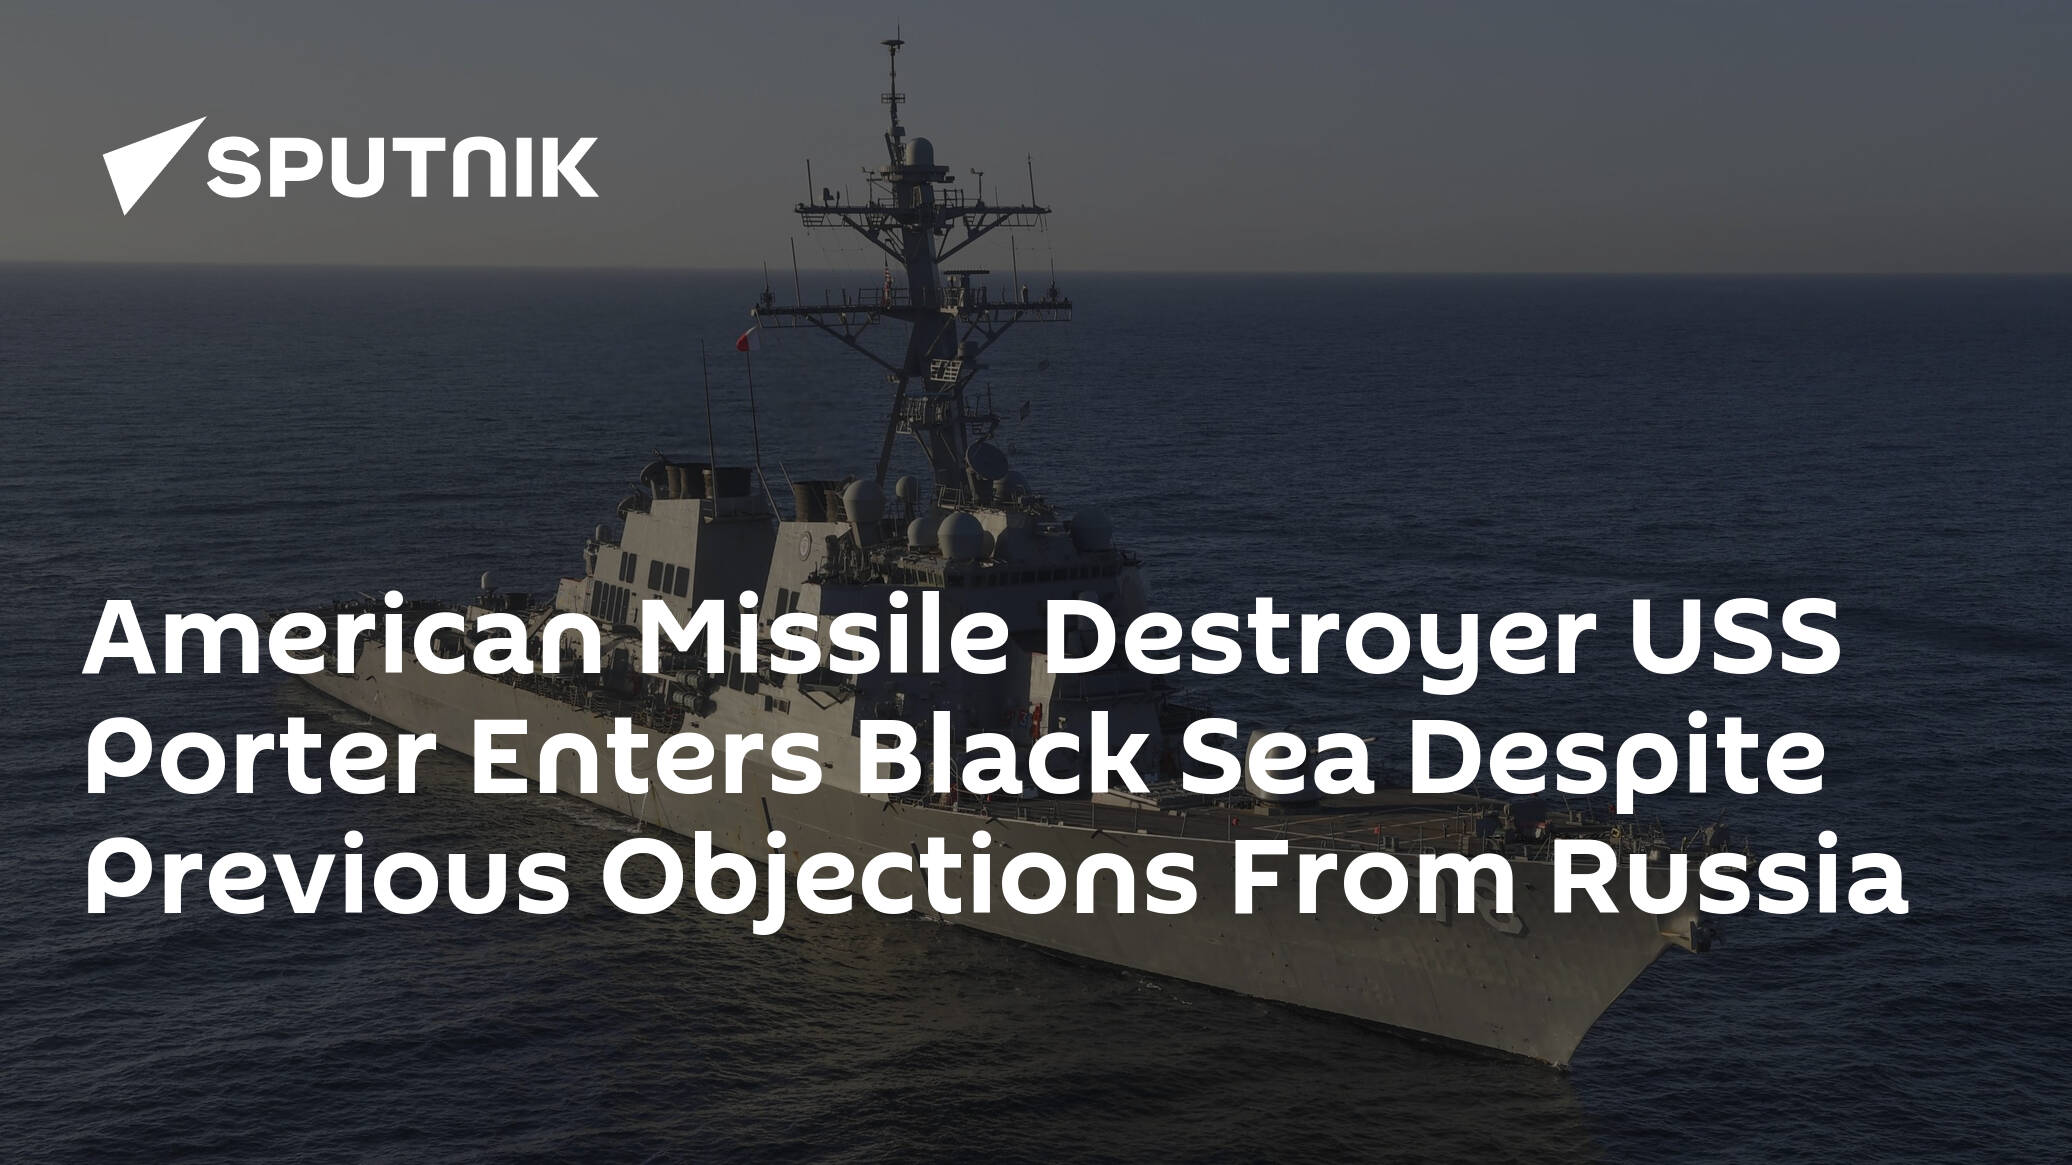 American Missile Destroyer USS Porter Enters Black Sea Despite Previous Objections From Russia